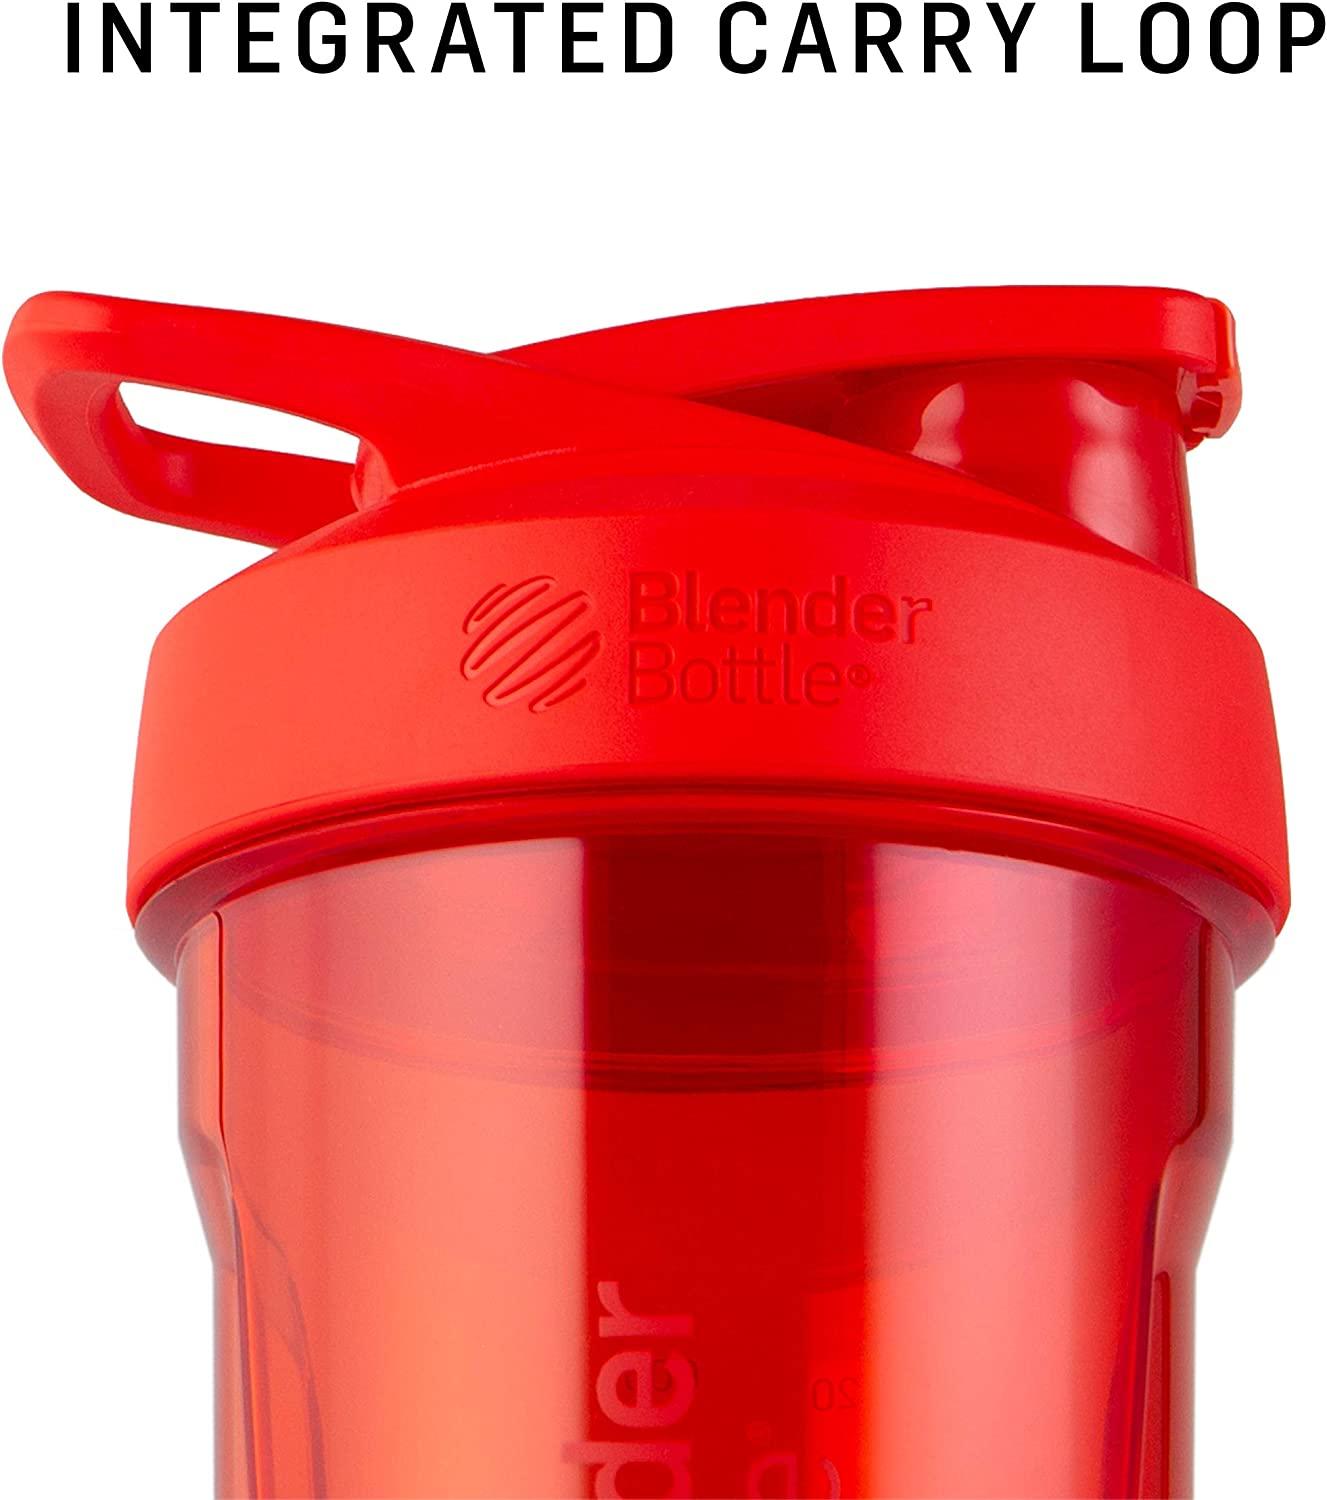 BlenderBottle Strada Shaker Cup Perfect for Protein Shakes and Pre Workout,  24-Ounce, Black